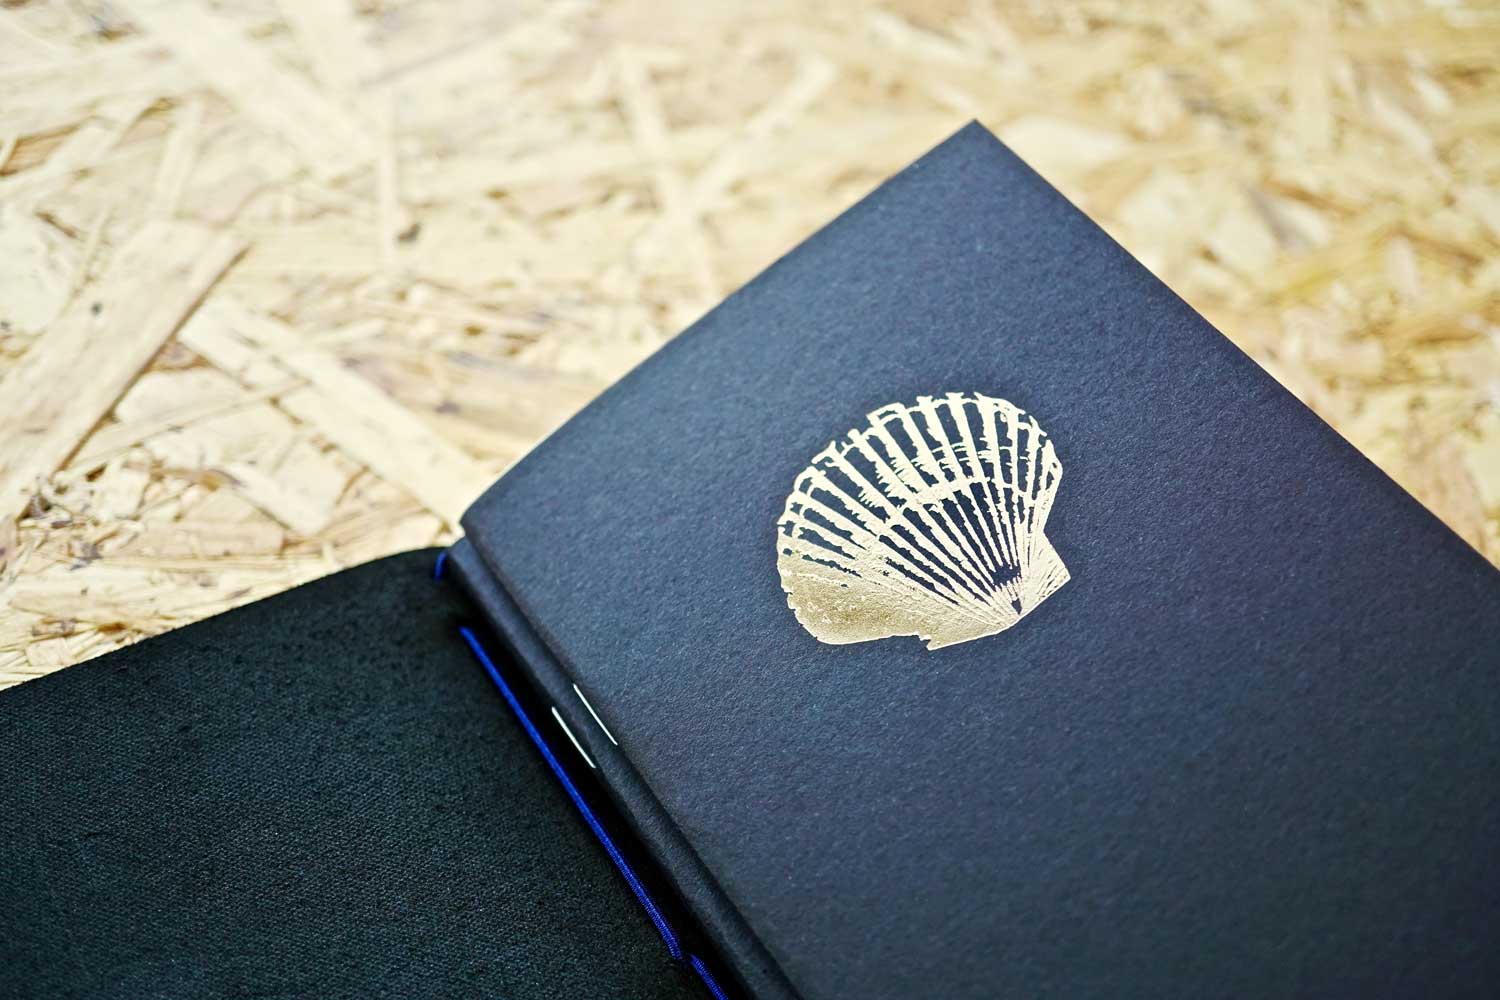 Never-ending journal - Seas the day, leather travel journal, with 3 A6 pocket size inner notebooks, this photo shows the shell illustration embossed in gold foil onto the cover